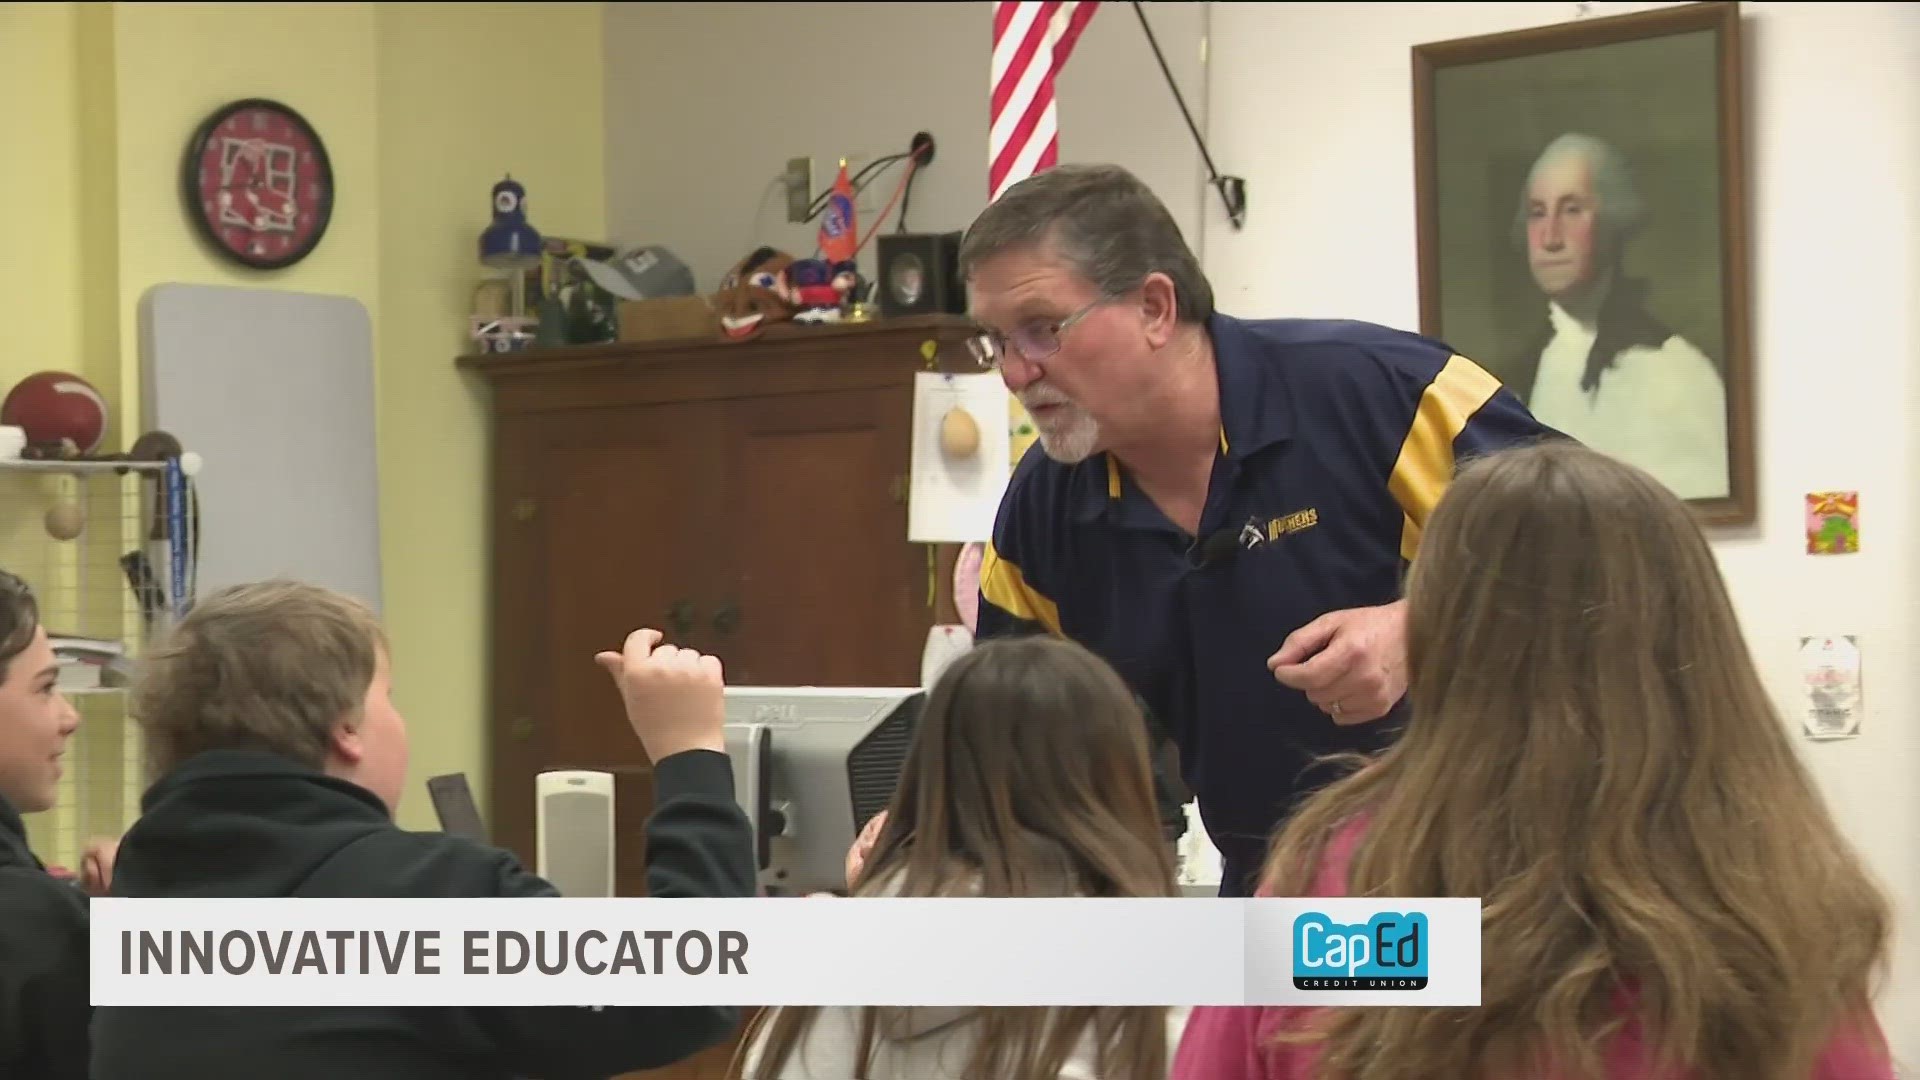 Randy "Coach" Jewett plays many roles at his small school in Fairfield, Idaho. He's this week's Innovative Educator.